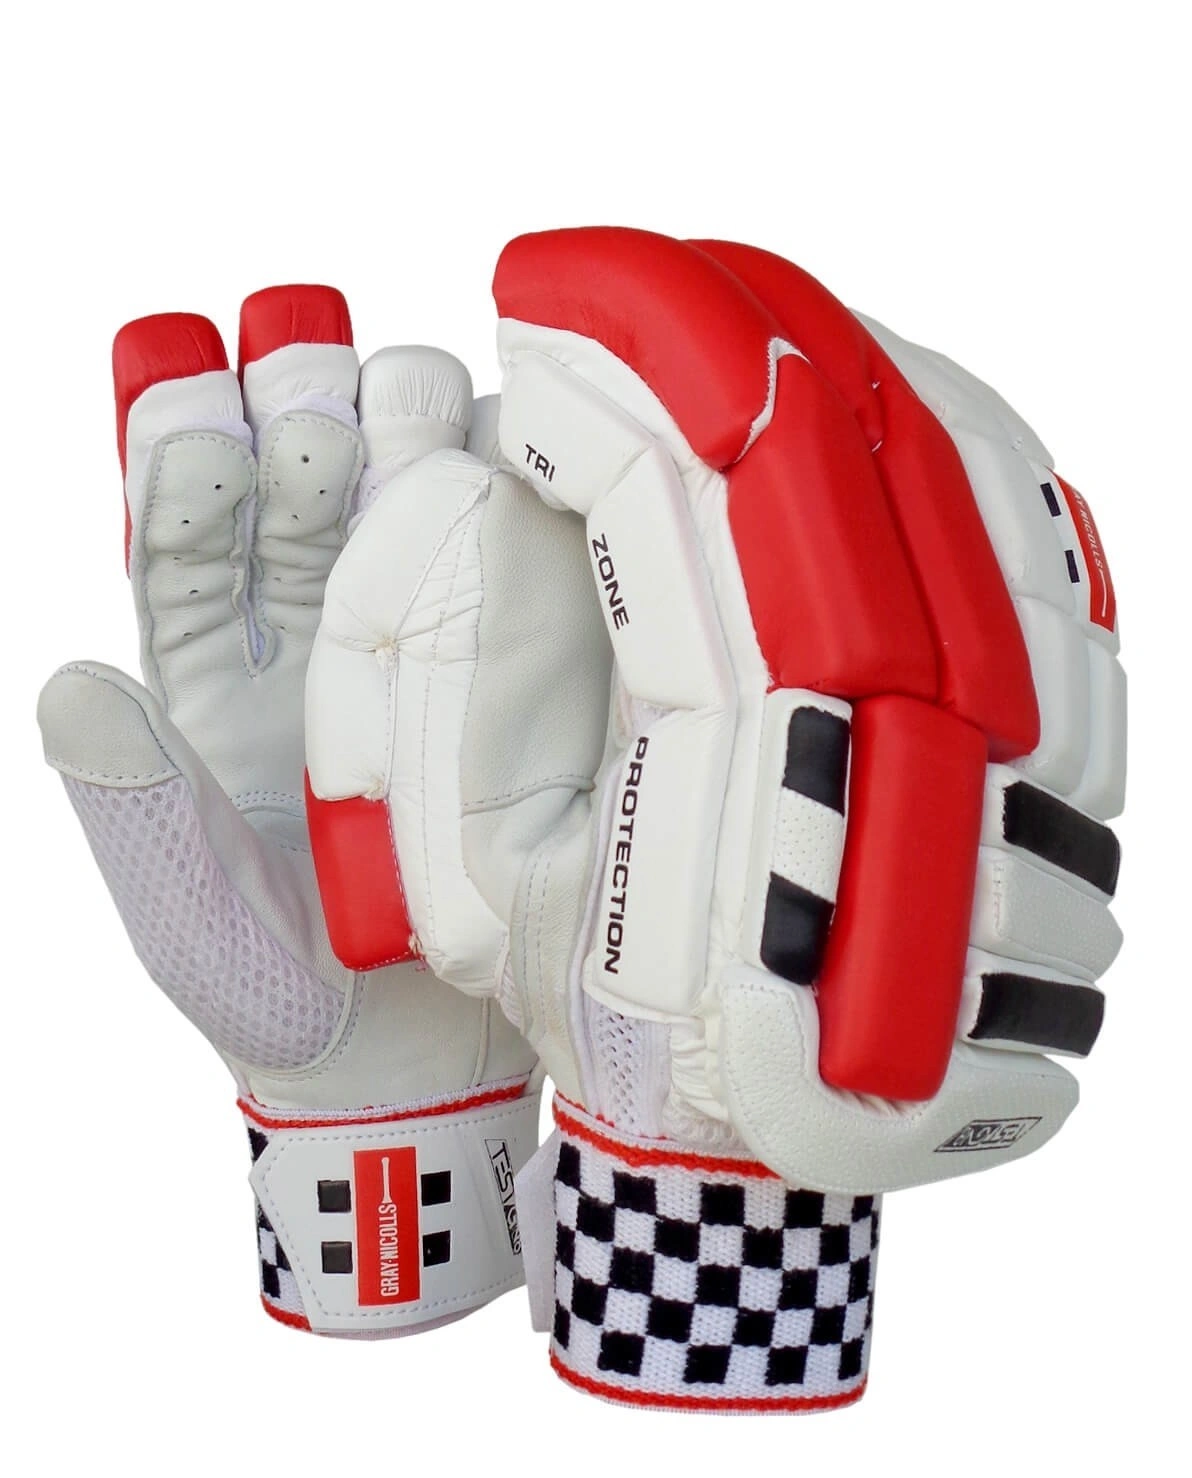 GRAY-NICOLLS GN7 PRO NITRO BATTING GLOVES MENS: Premium Leather Batting Gloves with X-LITE Foam and Gel Zone Technology for Maximum Comfort and Protection-37992